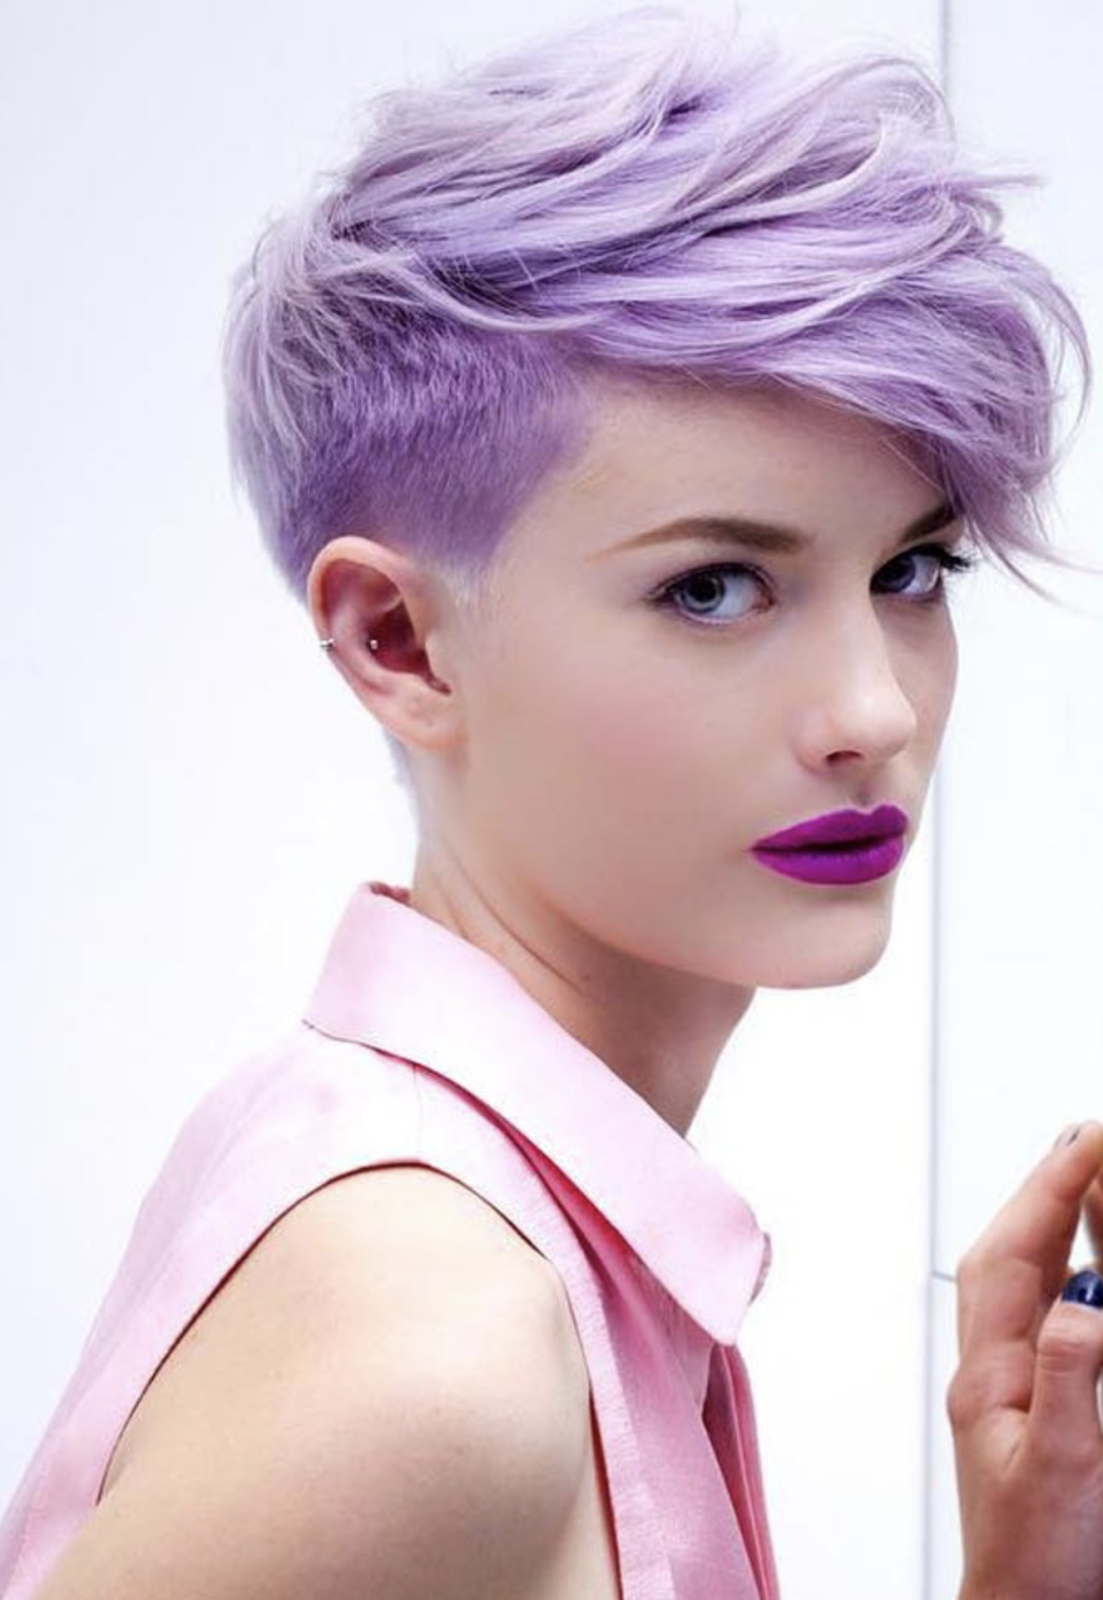 Latest Short Hairstyles For Women - Look Sexy in 2019